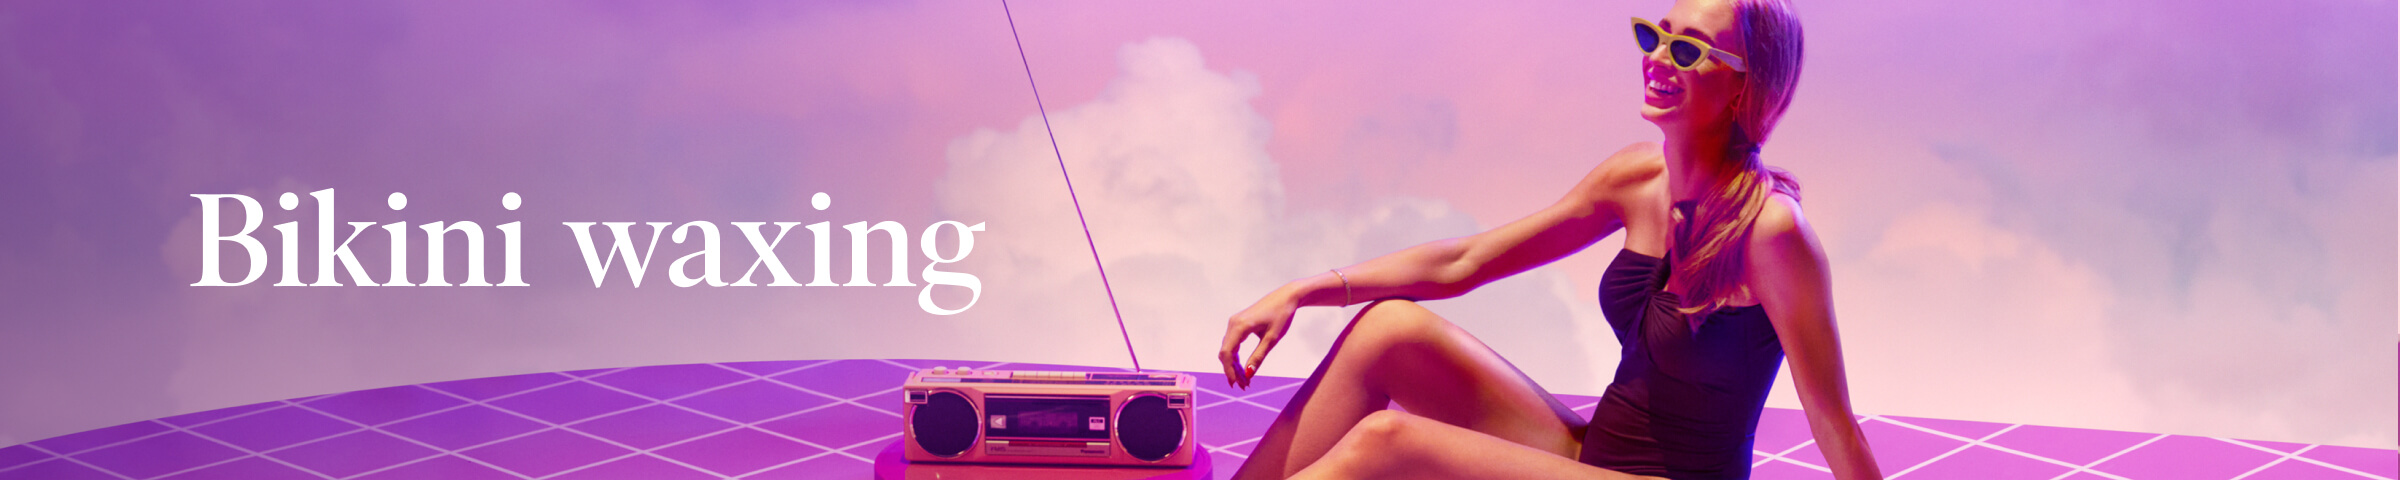 Bikini waxing in white text against purple, pink, and white sky with white woman smiling in black swimsuit and yellow sunglasses lounging on purple checkered surface with old school radio with antenna